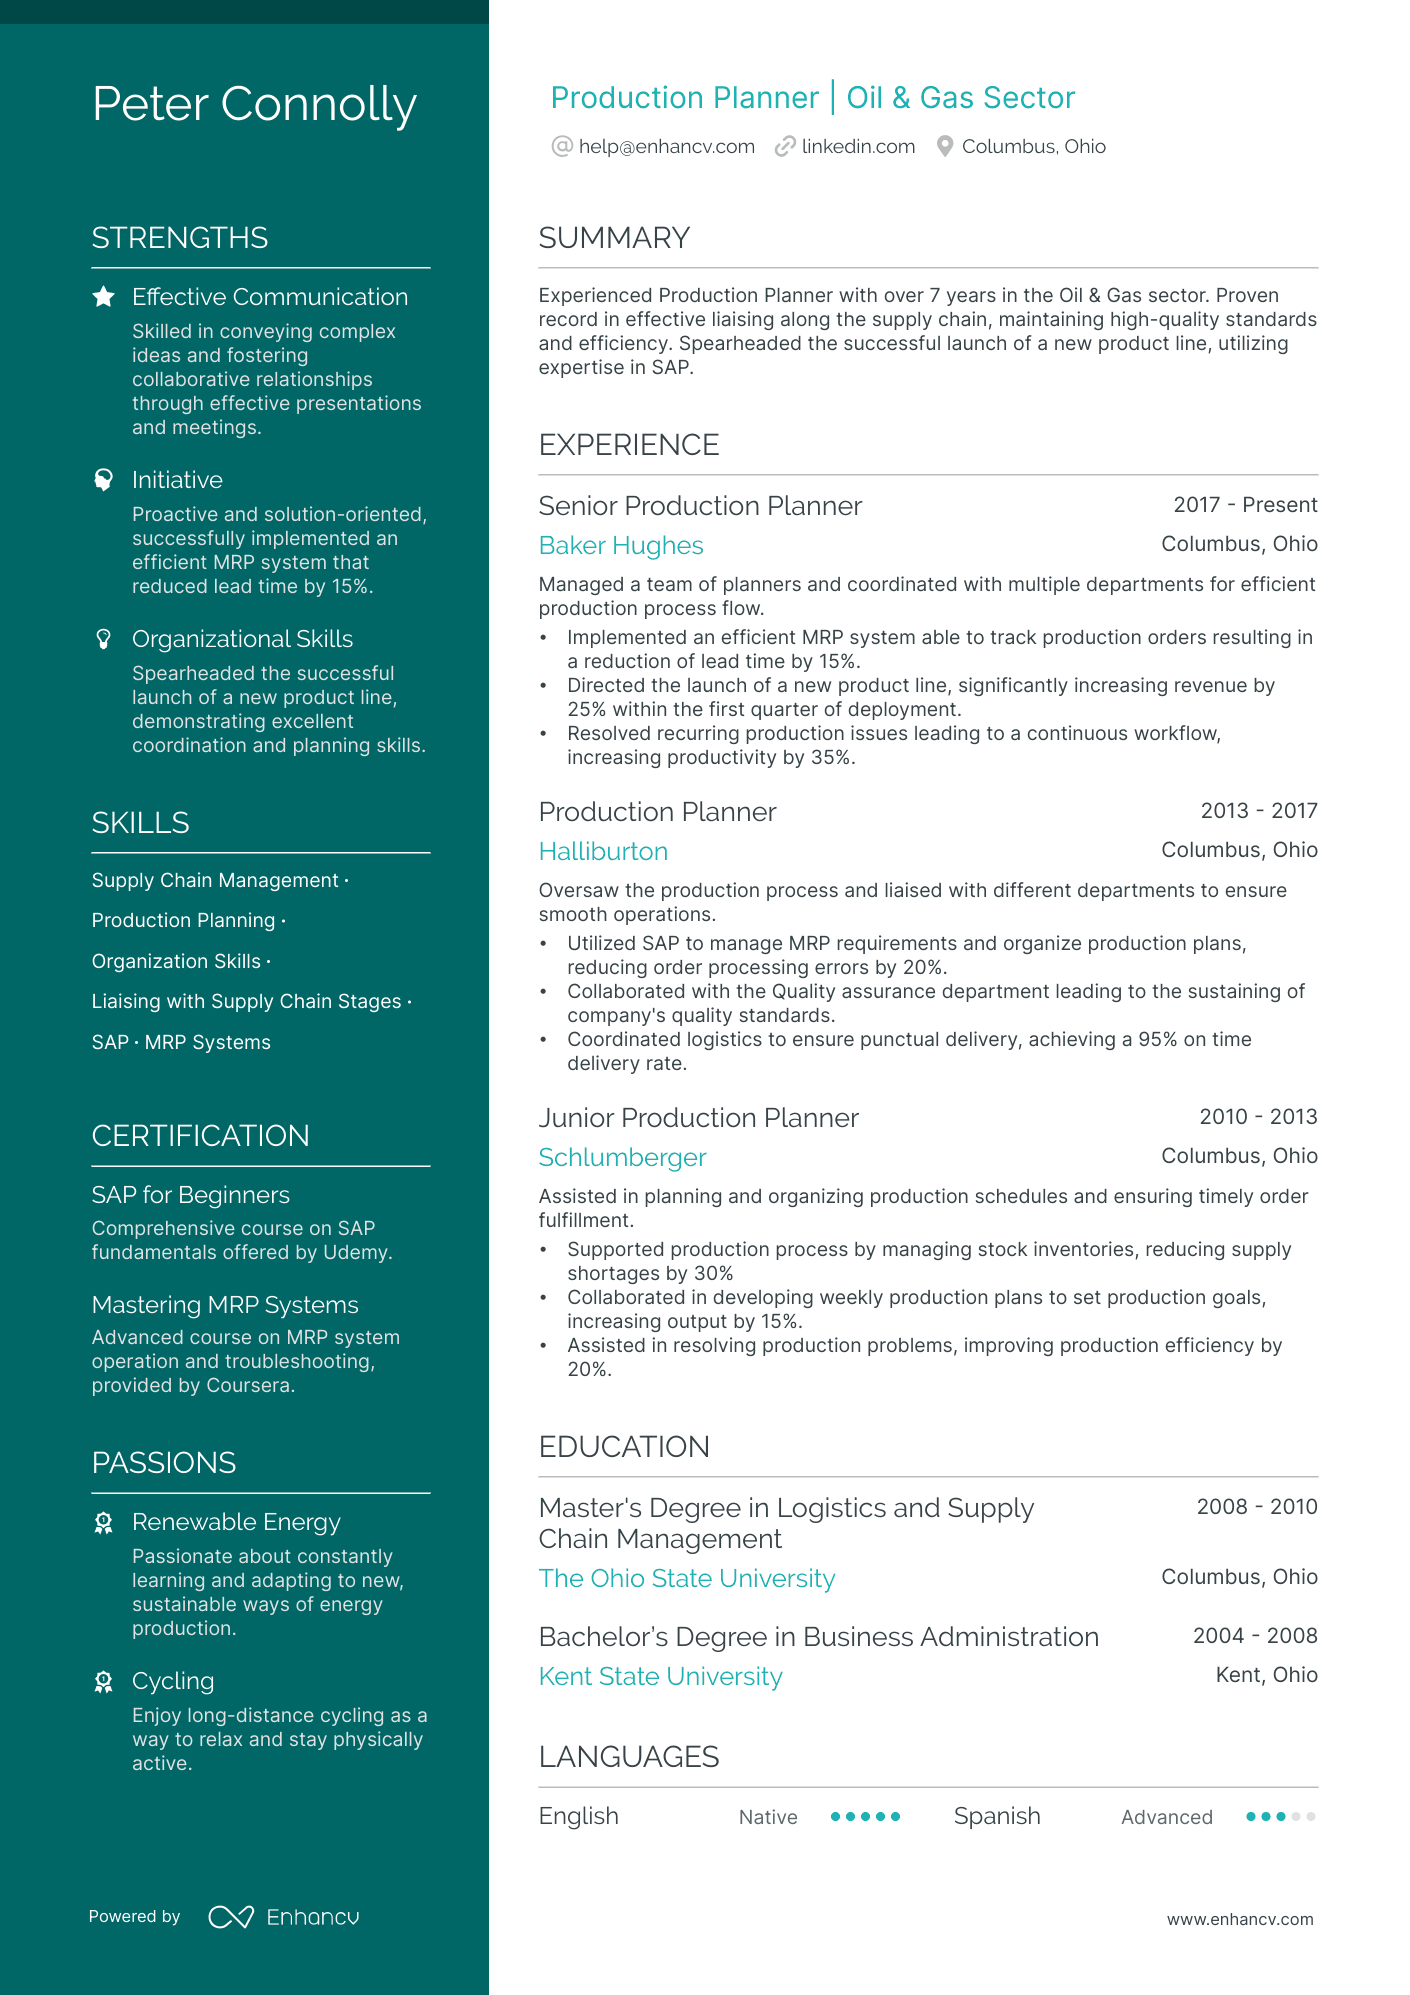 Production Planner resume example